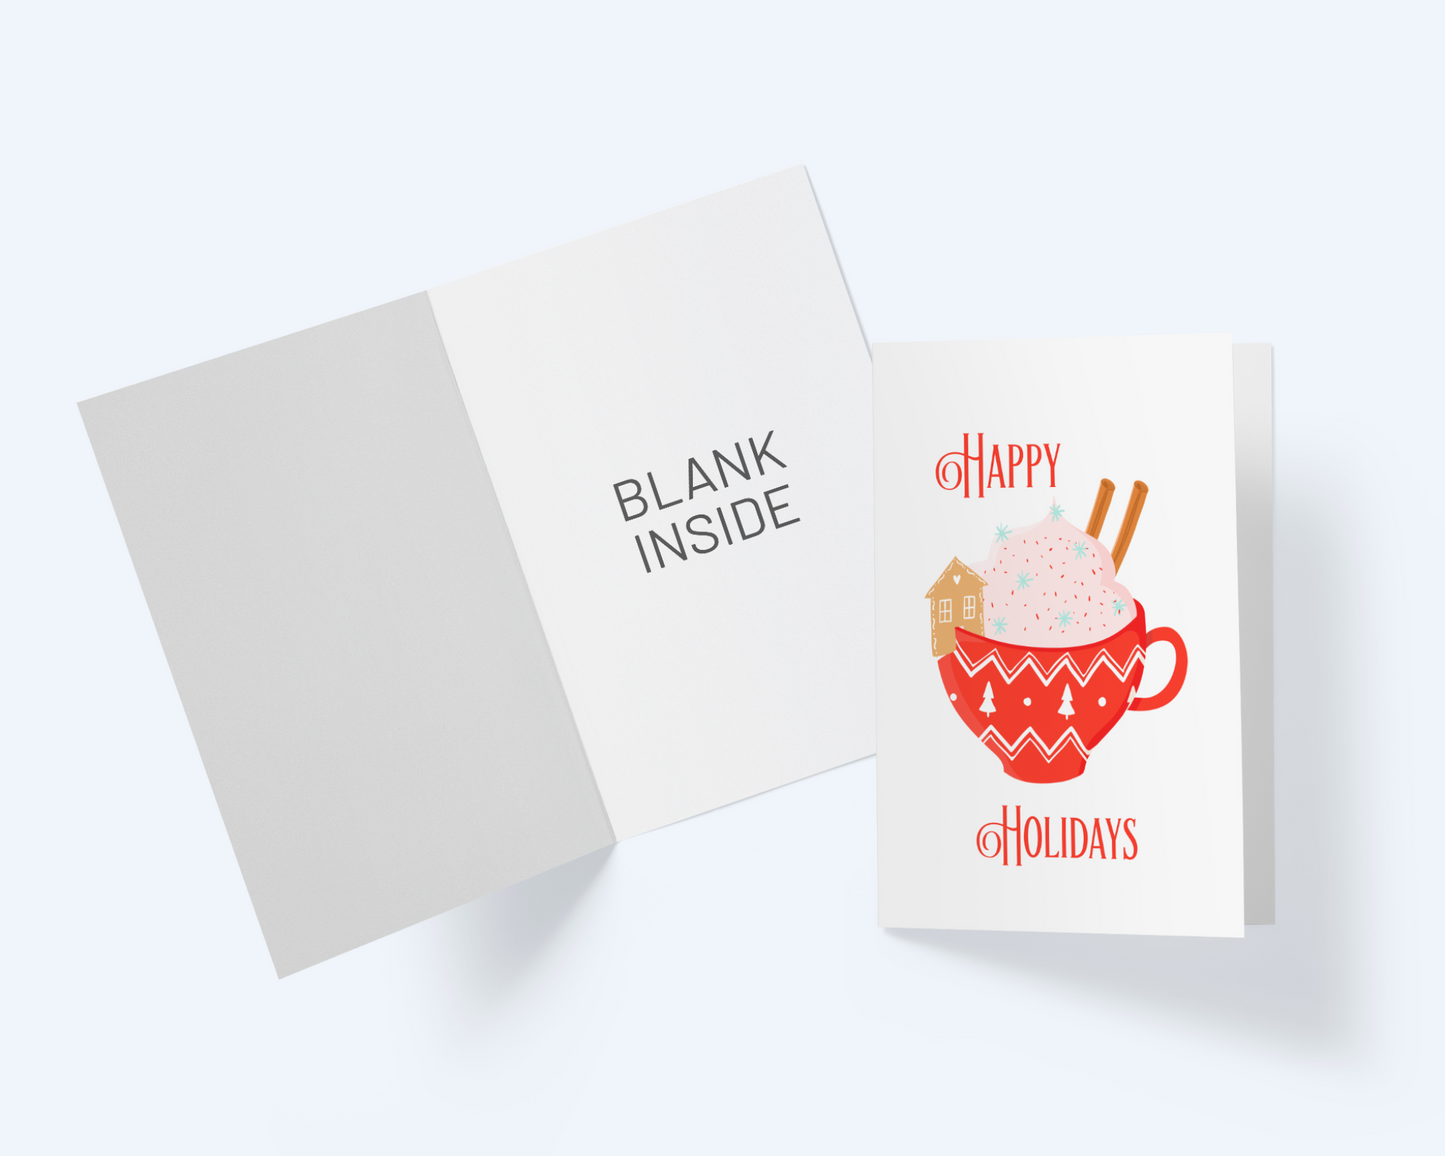 Happy Holidays Greeting Card, Greeting Card For The Holidays.